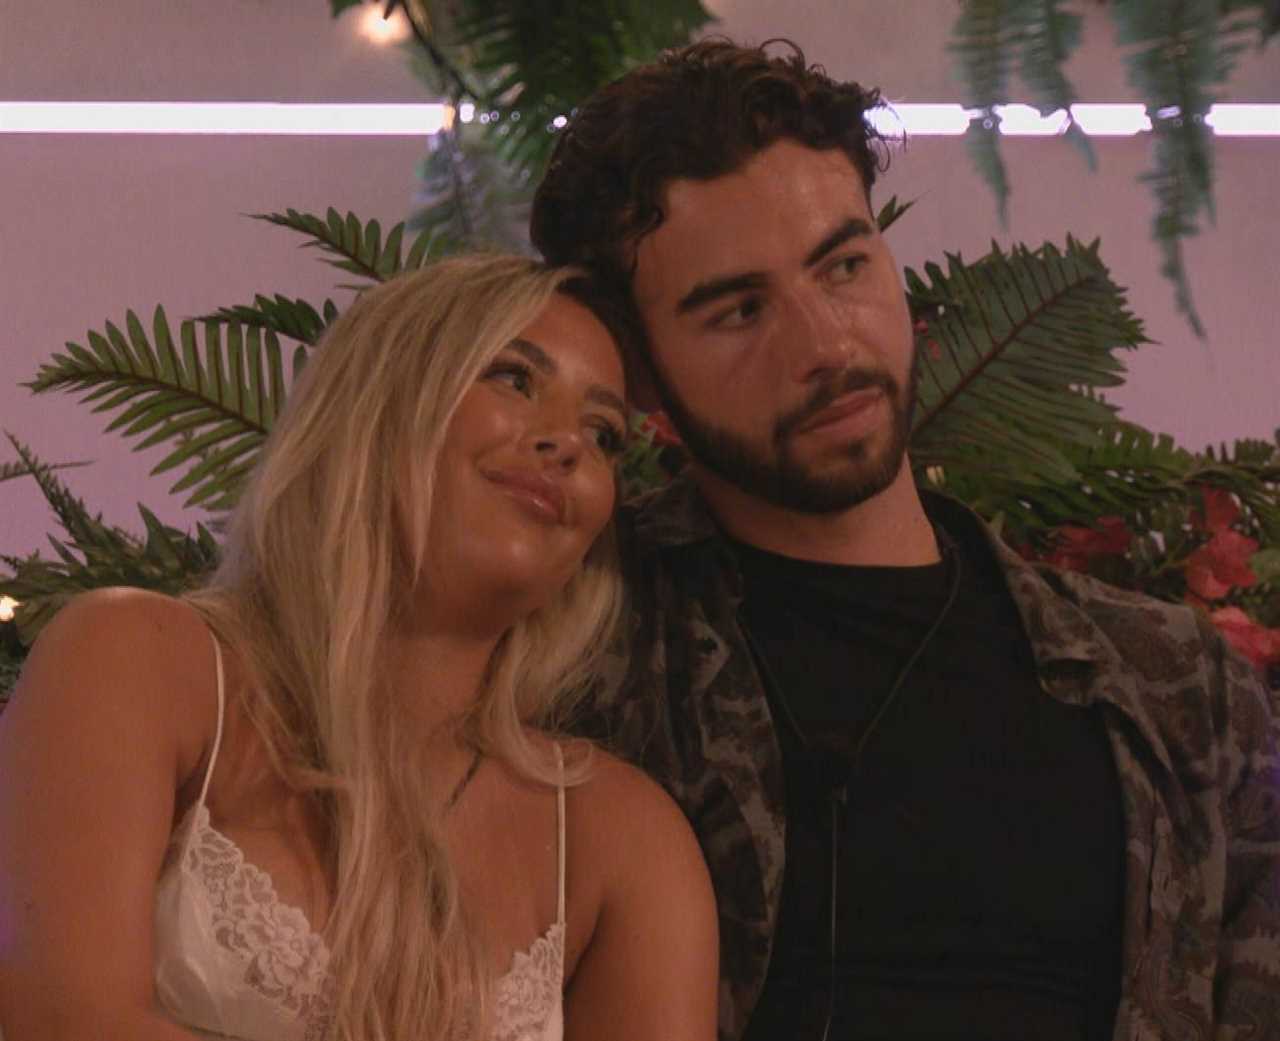 I was on this year’s Love Island and Sammy made savage dig about Jess – but it wasn’t shown on camera, says Mal